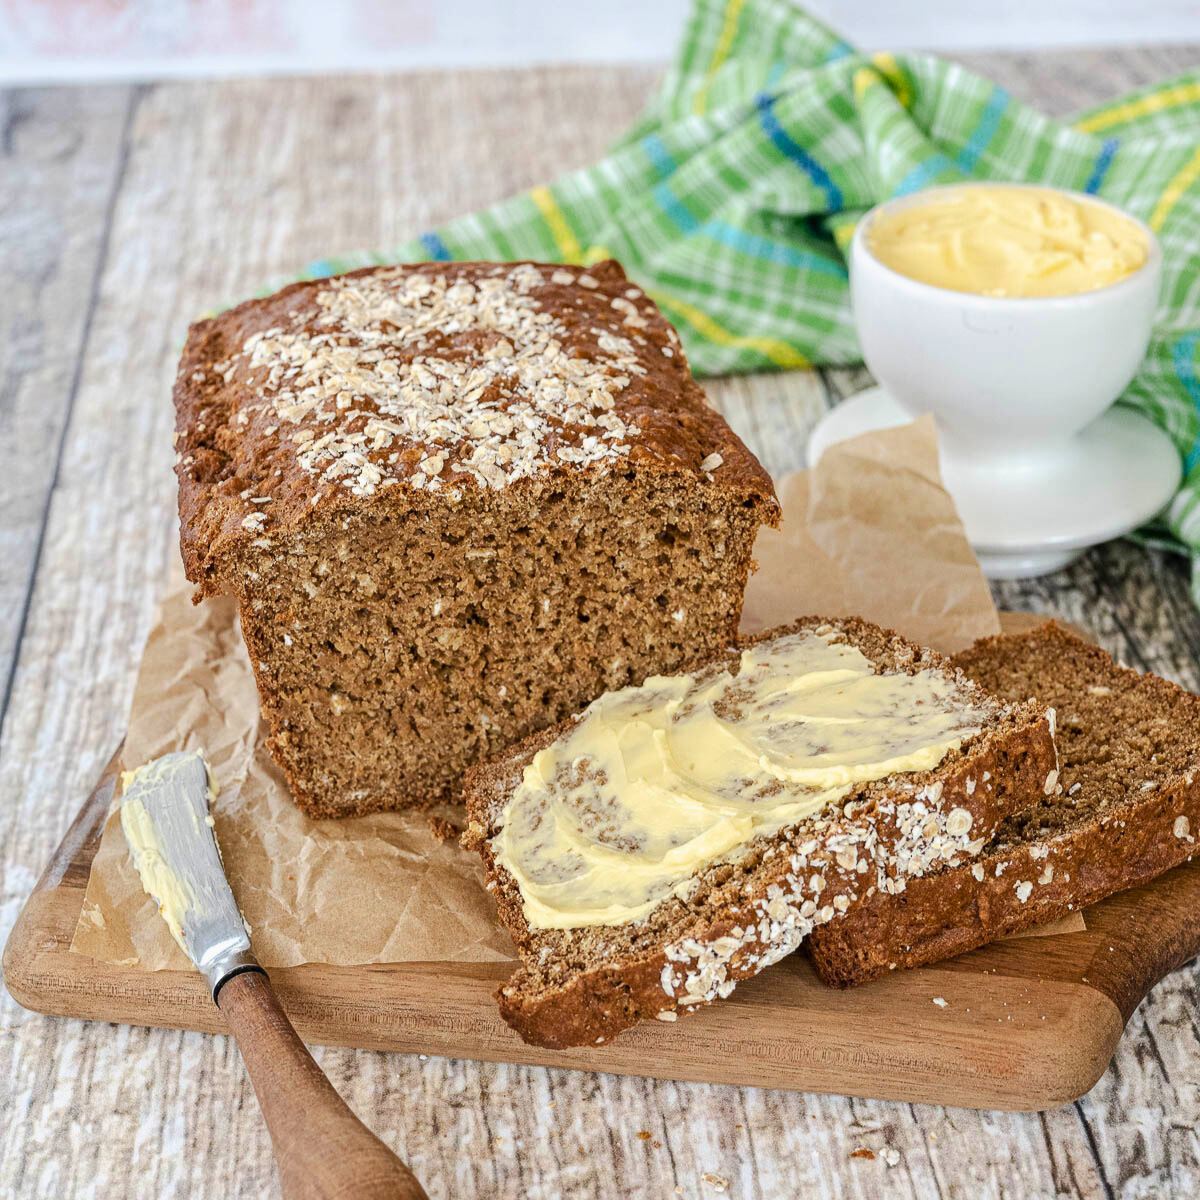 Guinness Irish brown bread on cutting board with slices smeared with Irish butter.